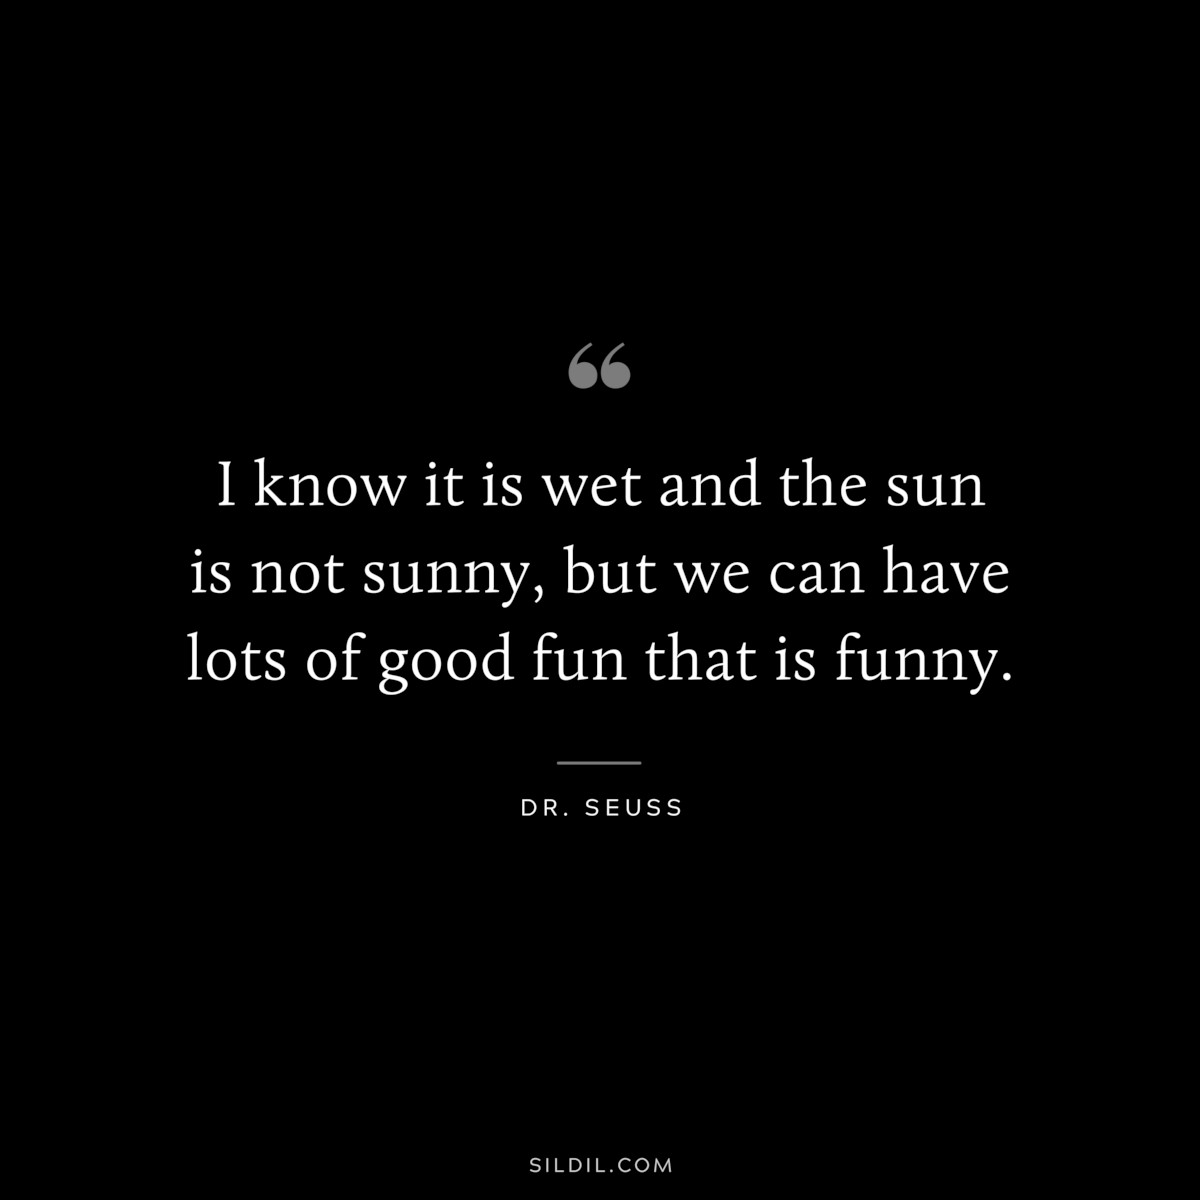 I know it is wet and the sun is not sunny, but we can have lots of good fun that is funny. ― Dr. Seuss